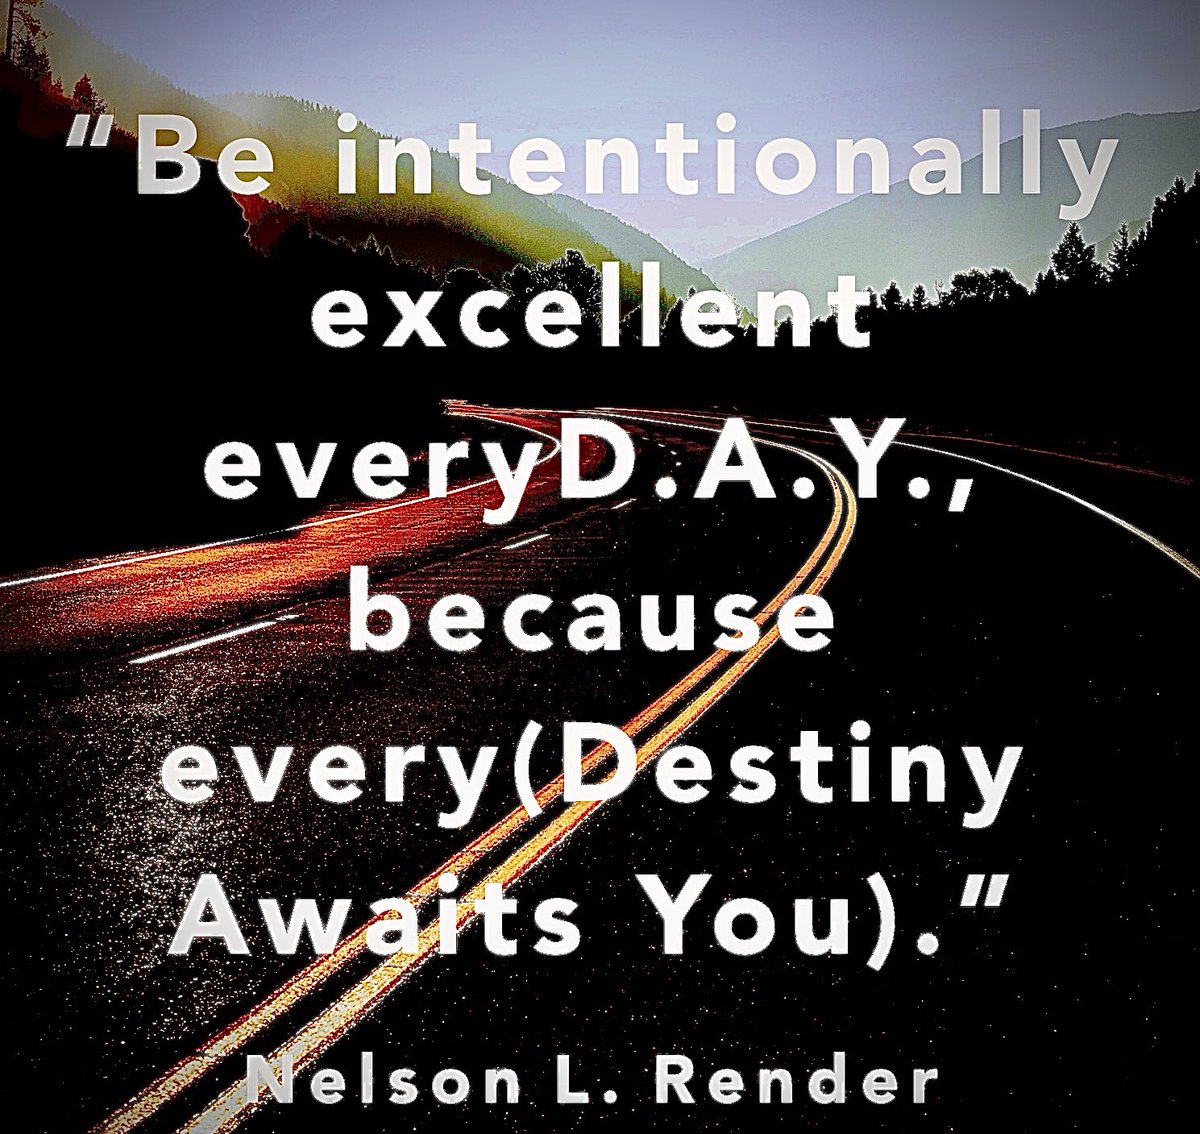 Life Renditions. The journey of life is a daily experience. #N10tionalimpact #beXcellentonpurpose